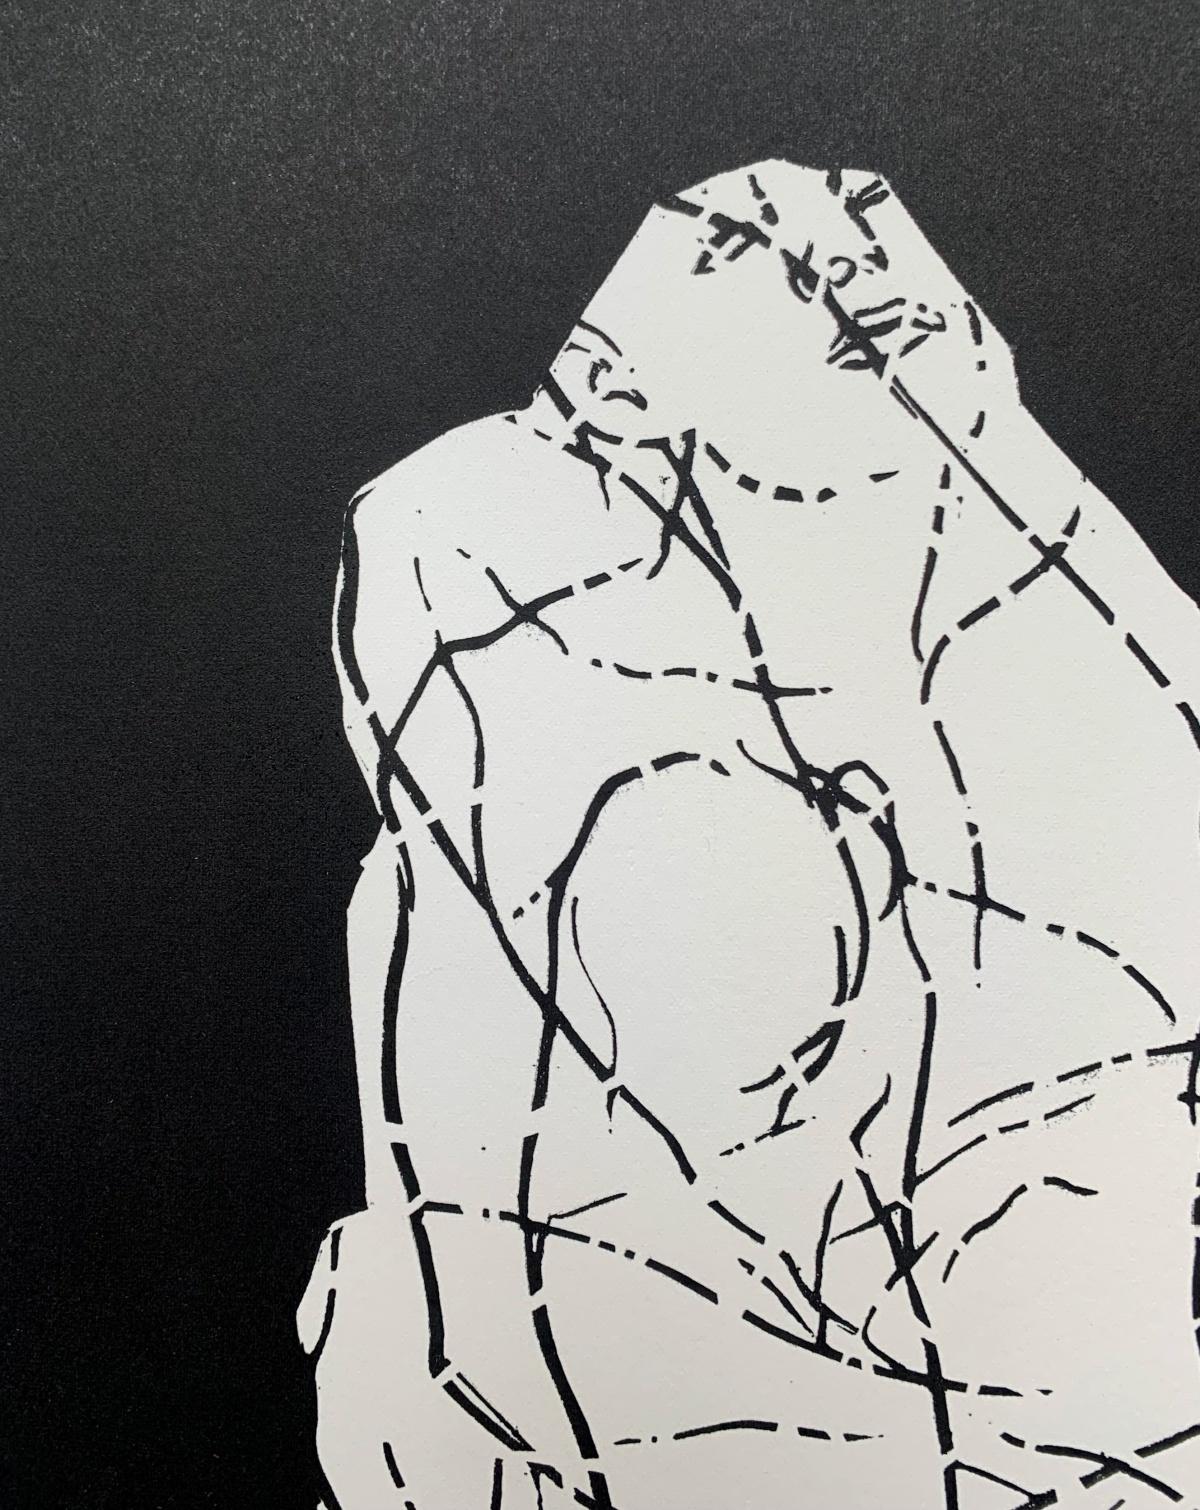 Black and white contemporary figurative linocut by Polish artist Luiza Kasprzyk. Artwork comes from limited edition of 50. Print depicts bodies permeating each other. 

LUIZA KASPRZYK
Studied at the Faculty of Graphics and Painting at the Academy of